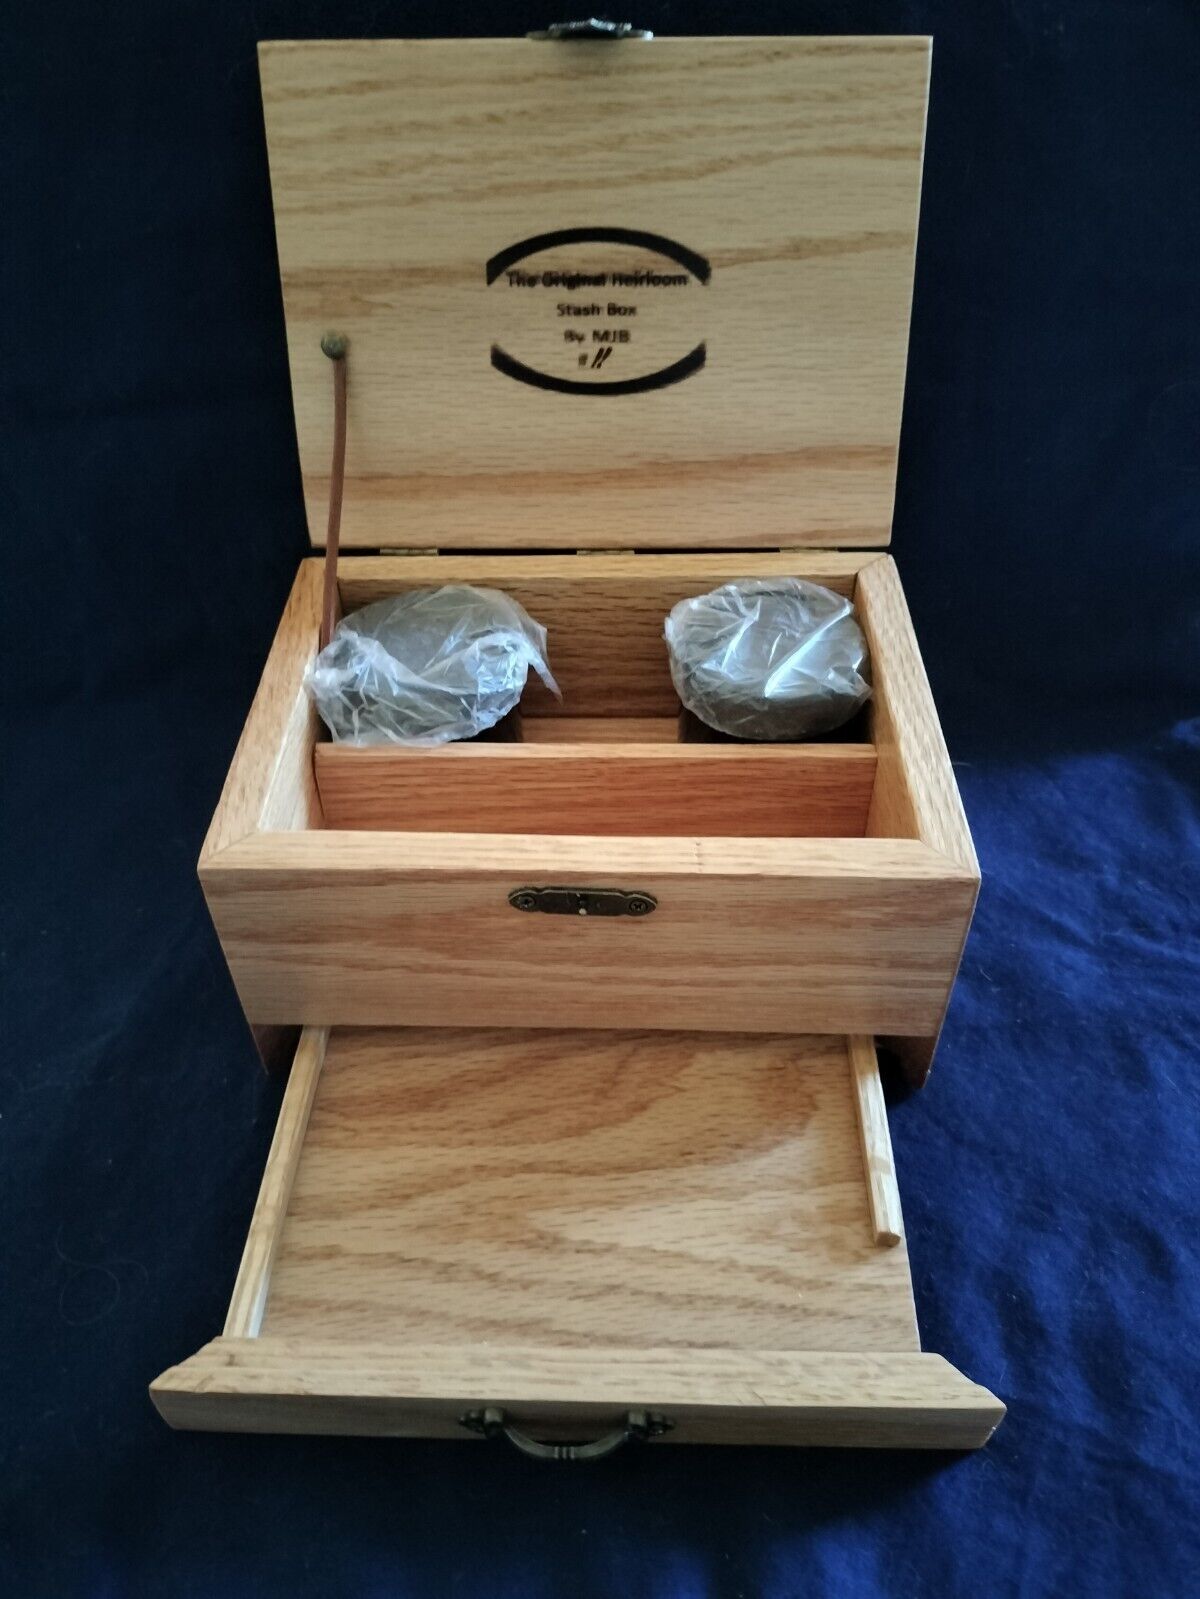 Handcrafted Solid Oak stash box for personal mementos, with herb grinder#18